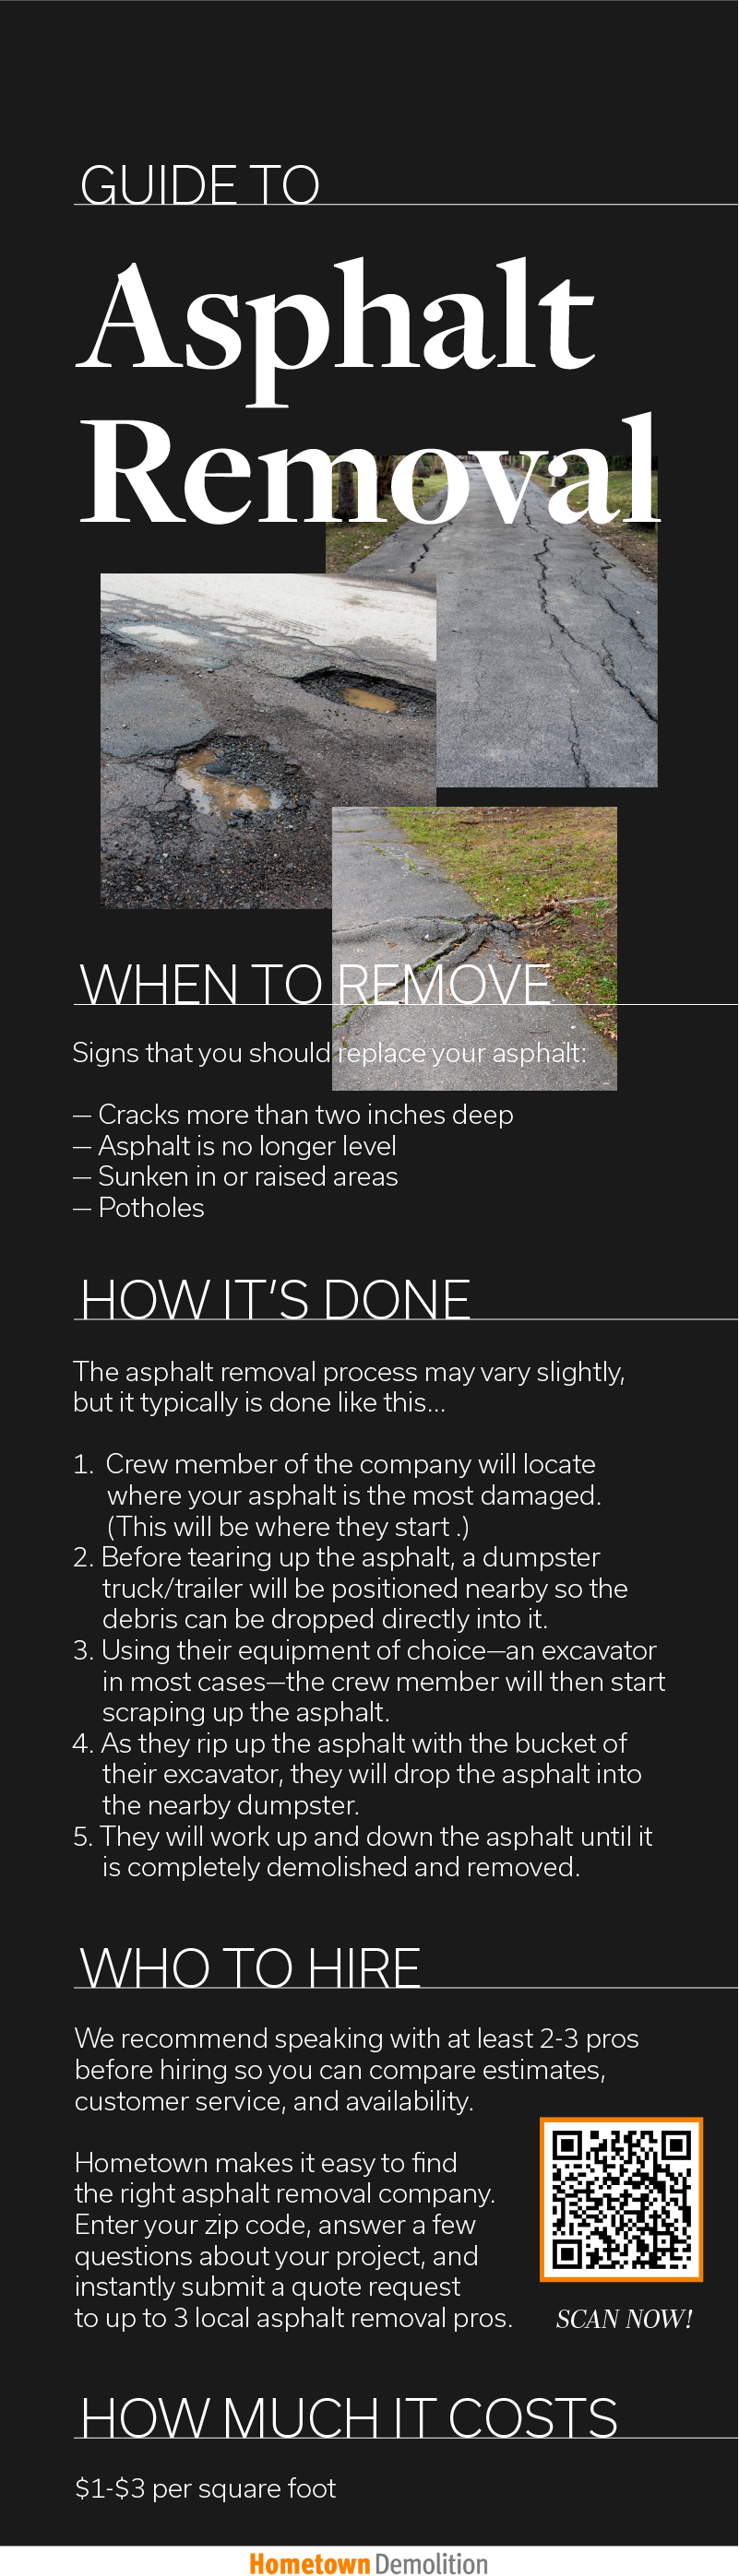 guide to asphalt removal infographic